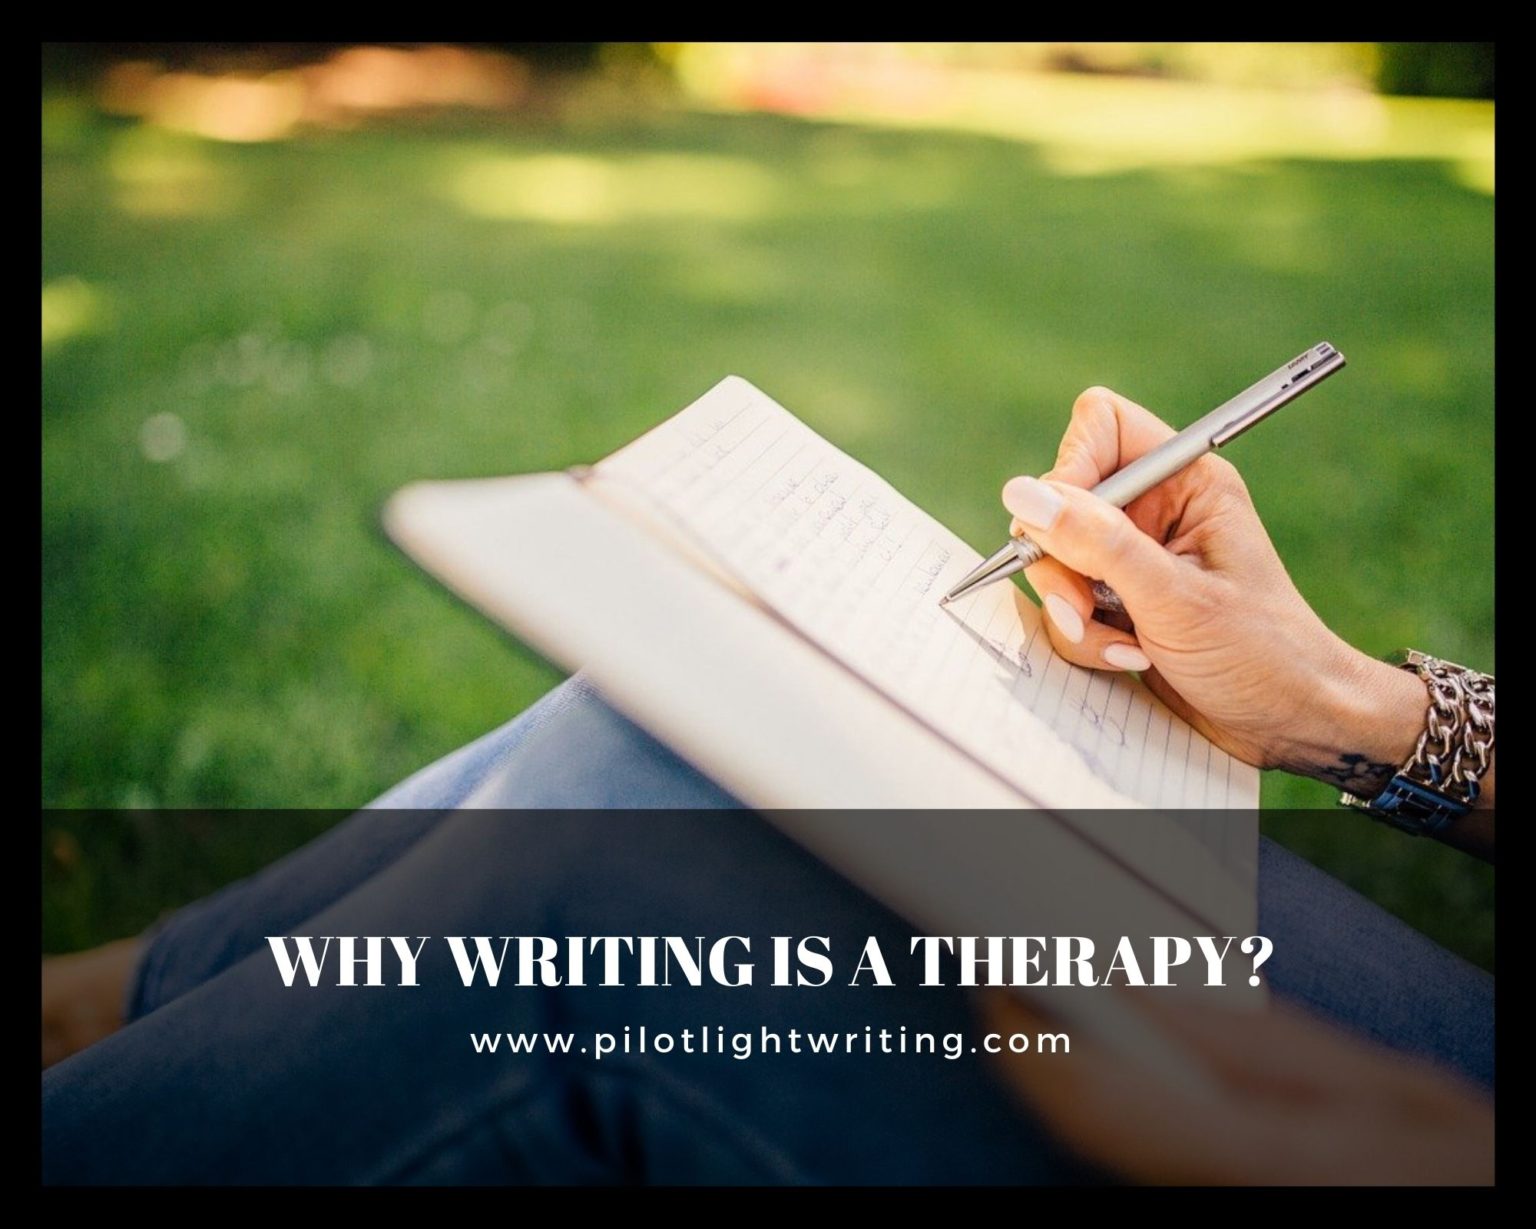 creative writing in therapy